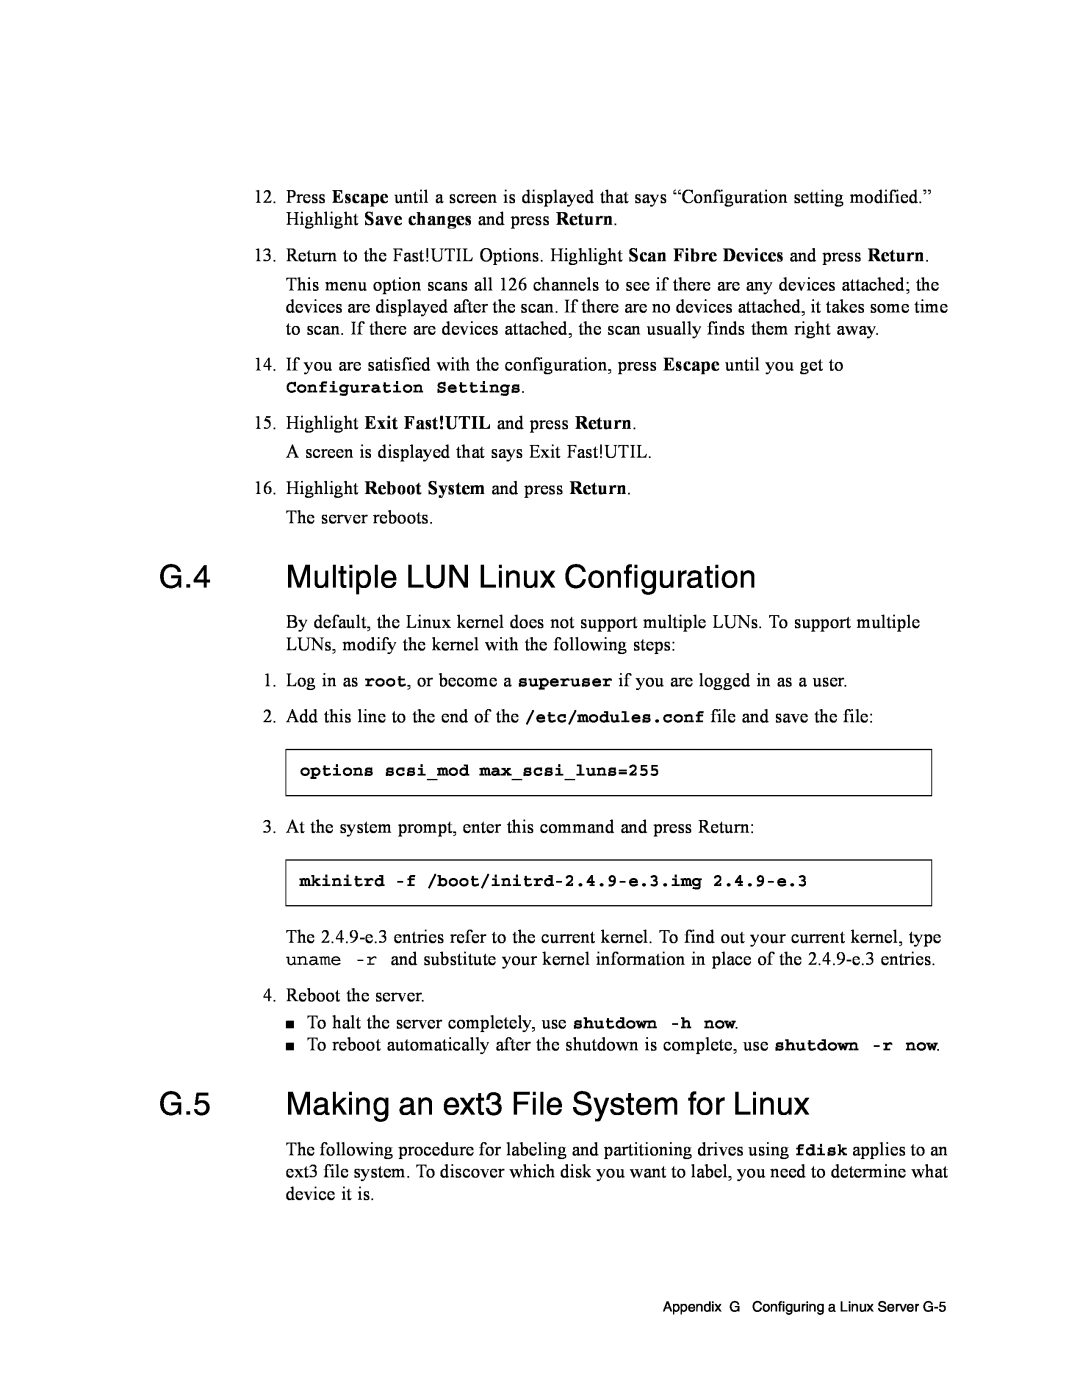 Dot Hill Systems II 200 FC service manual G.4 Multiple LUN Linux Configuration, G.5 Making an ext3 File System for Linux 